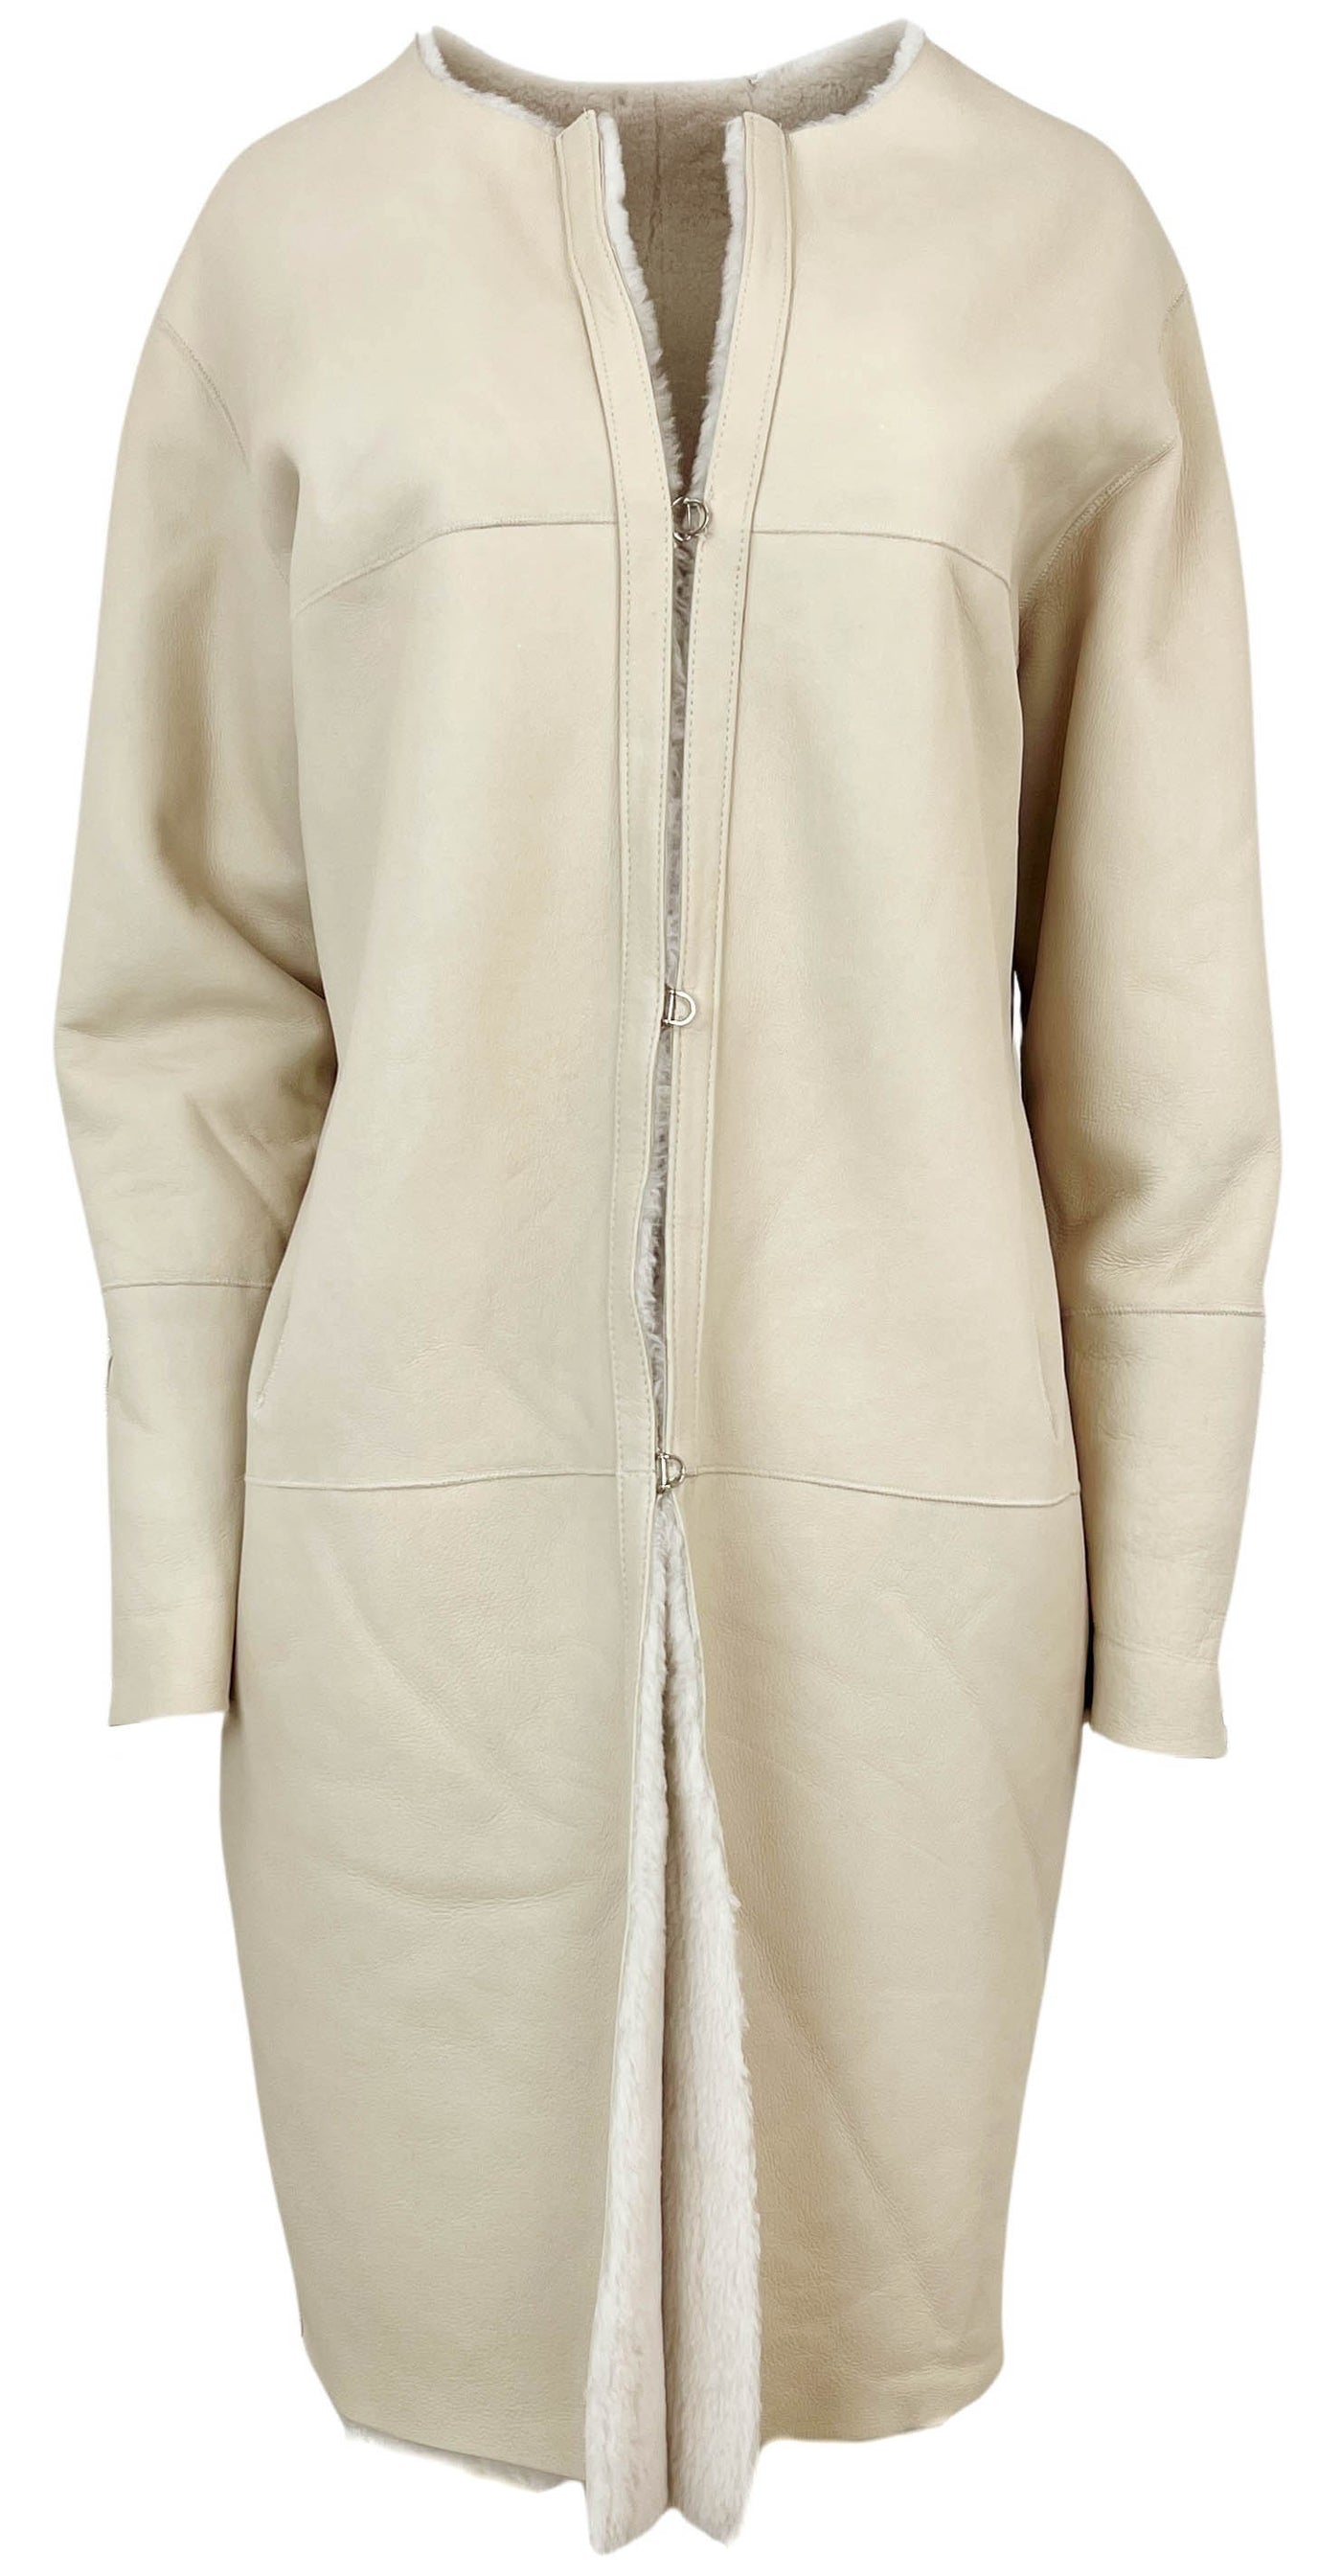 Susan Bender Leather and Shearling Coat in Cream - Discounts on Susan Bender at UAL